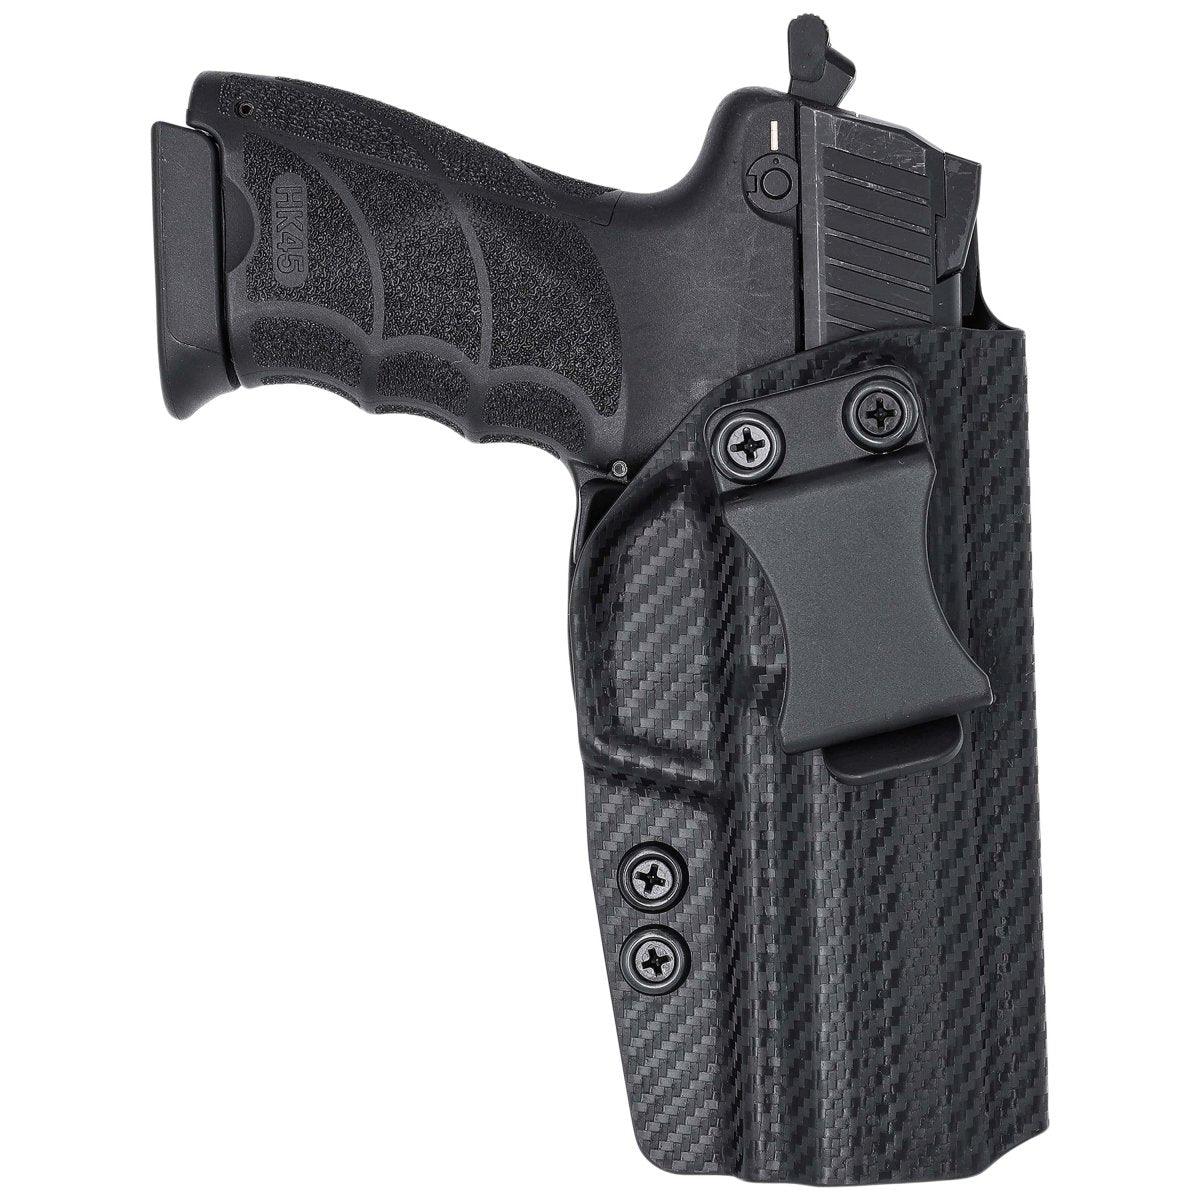 45 COMPACT HOLSTERS